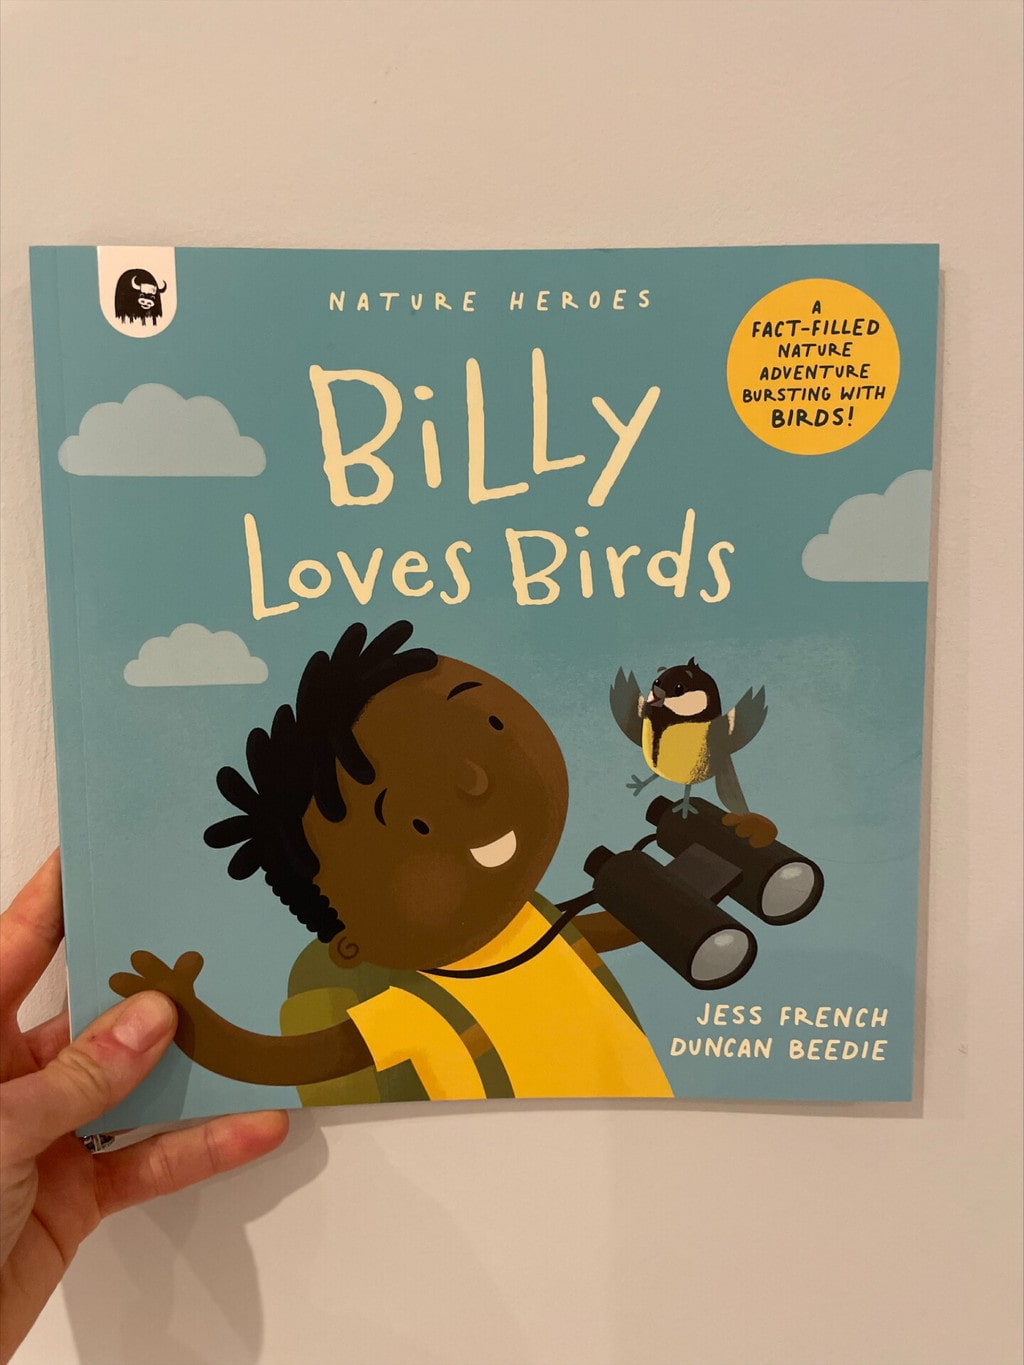 Nature Heroes: Billy Loves Birds (Jess French) (author), Duncan Beedie (illustrator), Happy Yak (imprint of Quarto) (publisher)